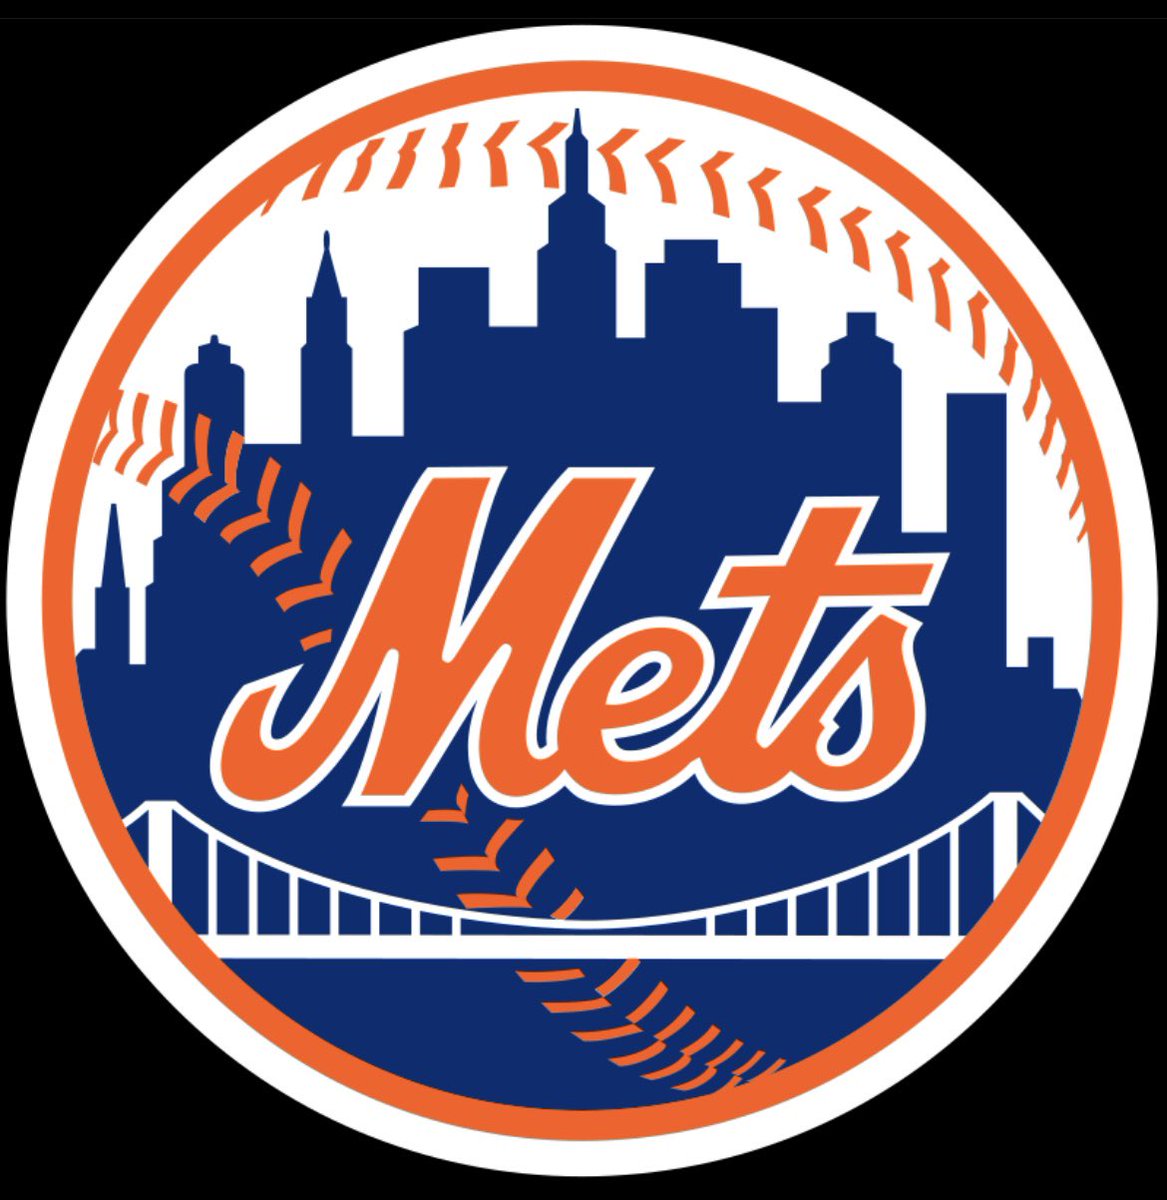 Excited to announce that I have accepted a role with the Mets as Coordinator of Pitching and Performance Integration. ⁣ ⁣ Pumped to team up with @ericjagers and the rest of the Mets staff. Let’s get to work! #LGM